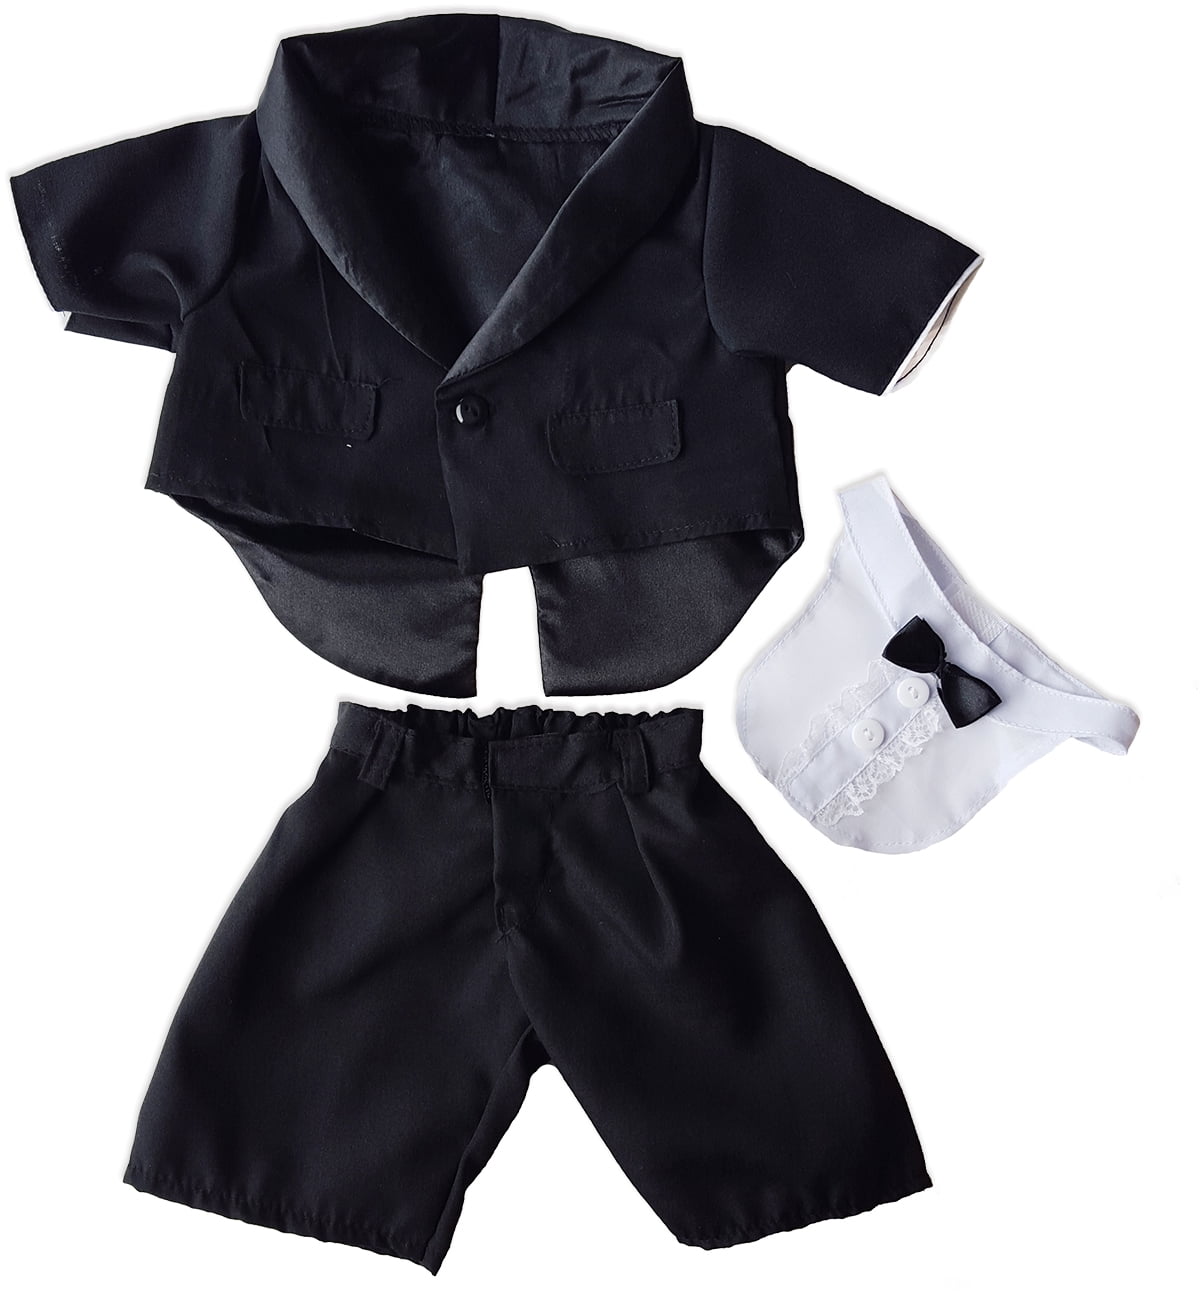 tuxedo outfit teddy bear clothes fits most 14